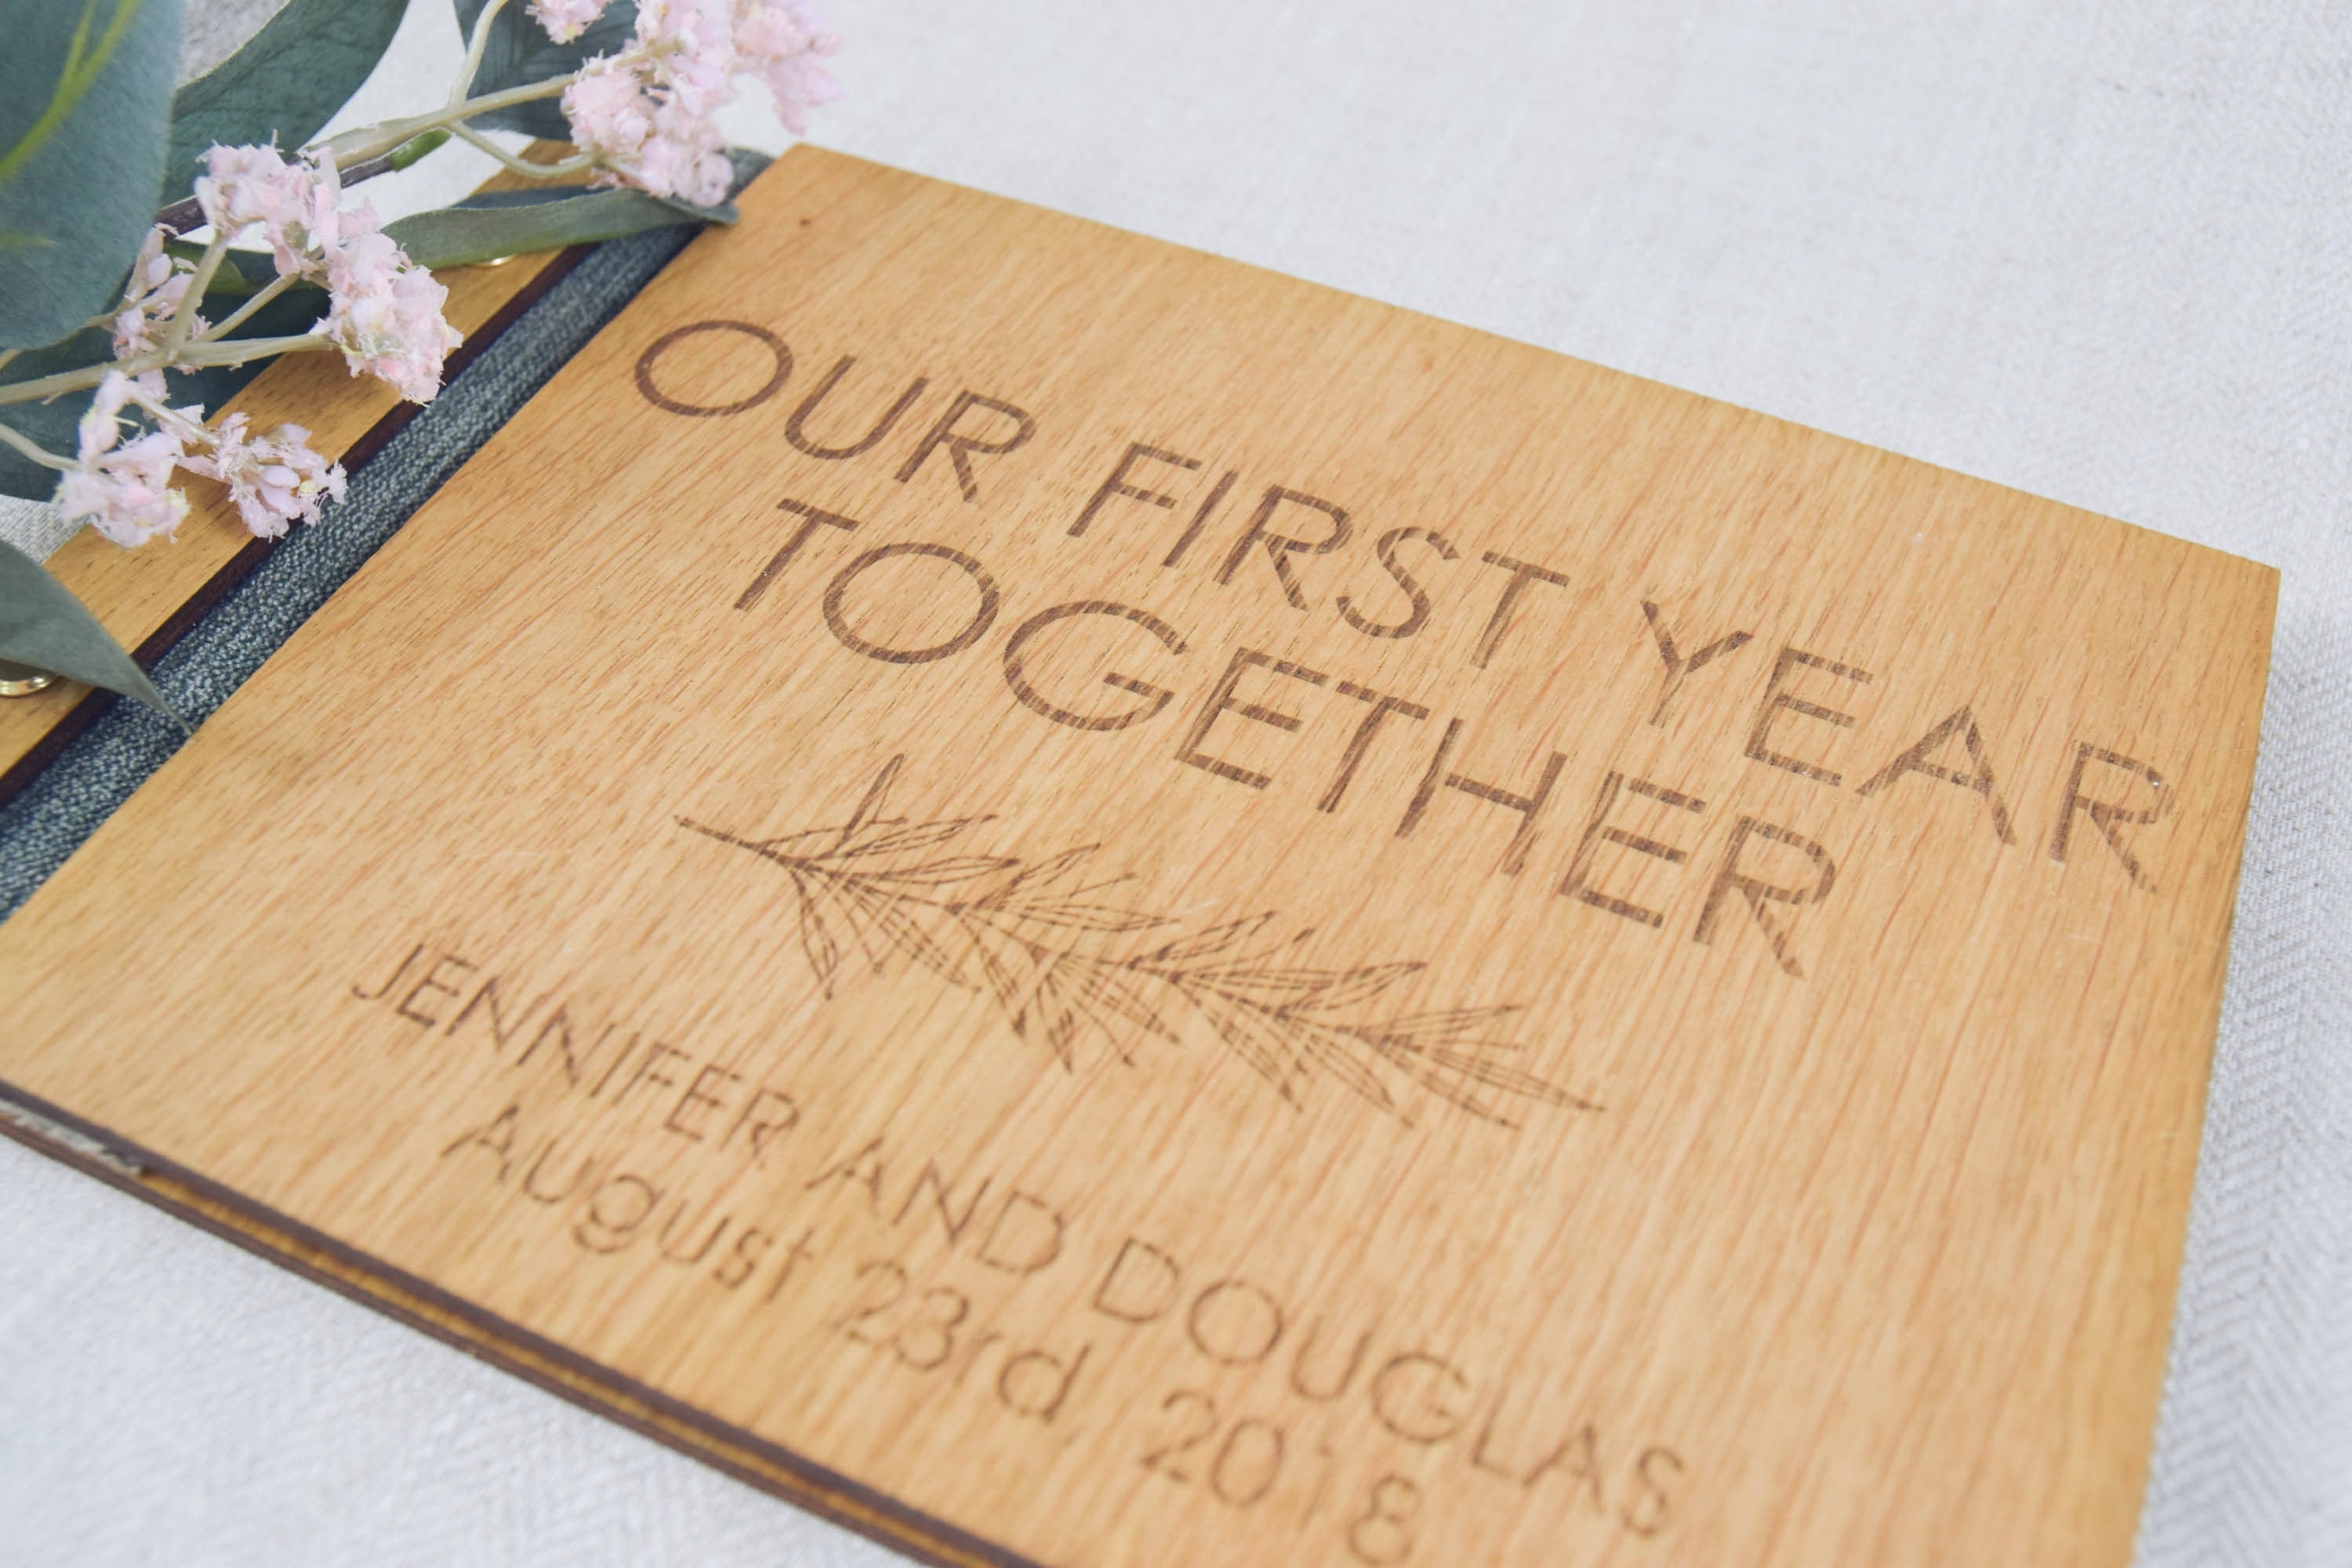 Year one of our love story - Our First Year Together: couples relationship  photo journal scrapbook (Couples yearly relationship journal scrapbooks)